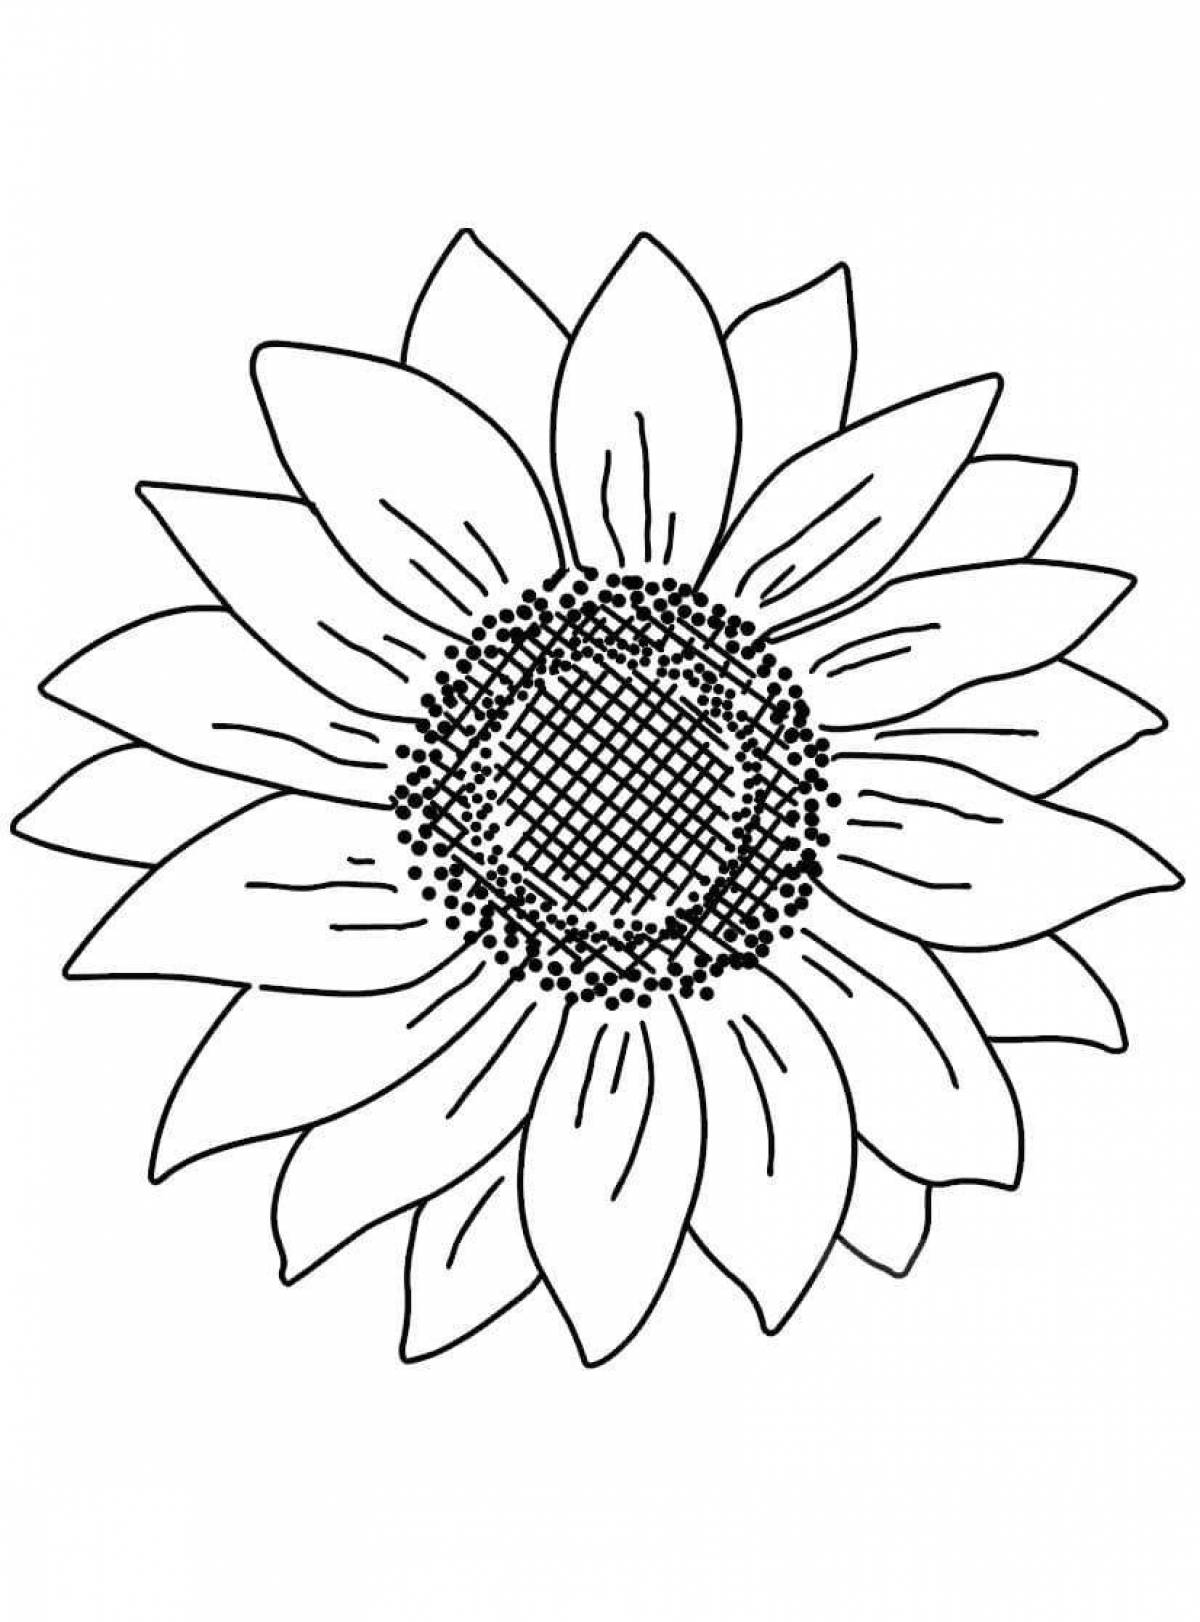 Amazing sunflowers coloring book for kids